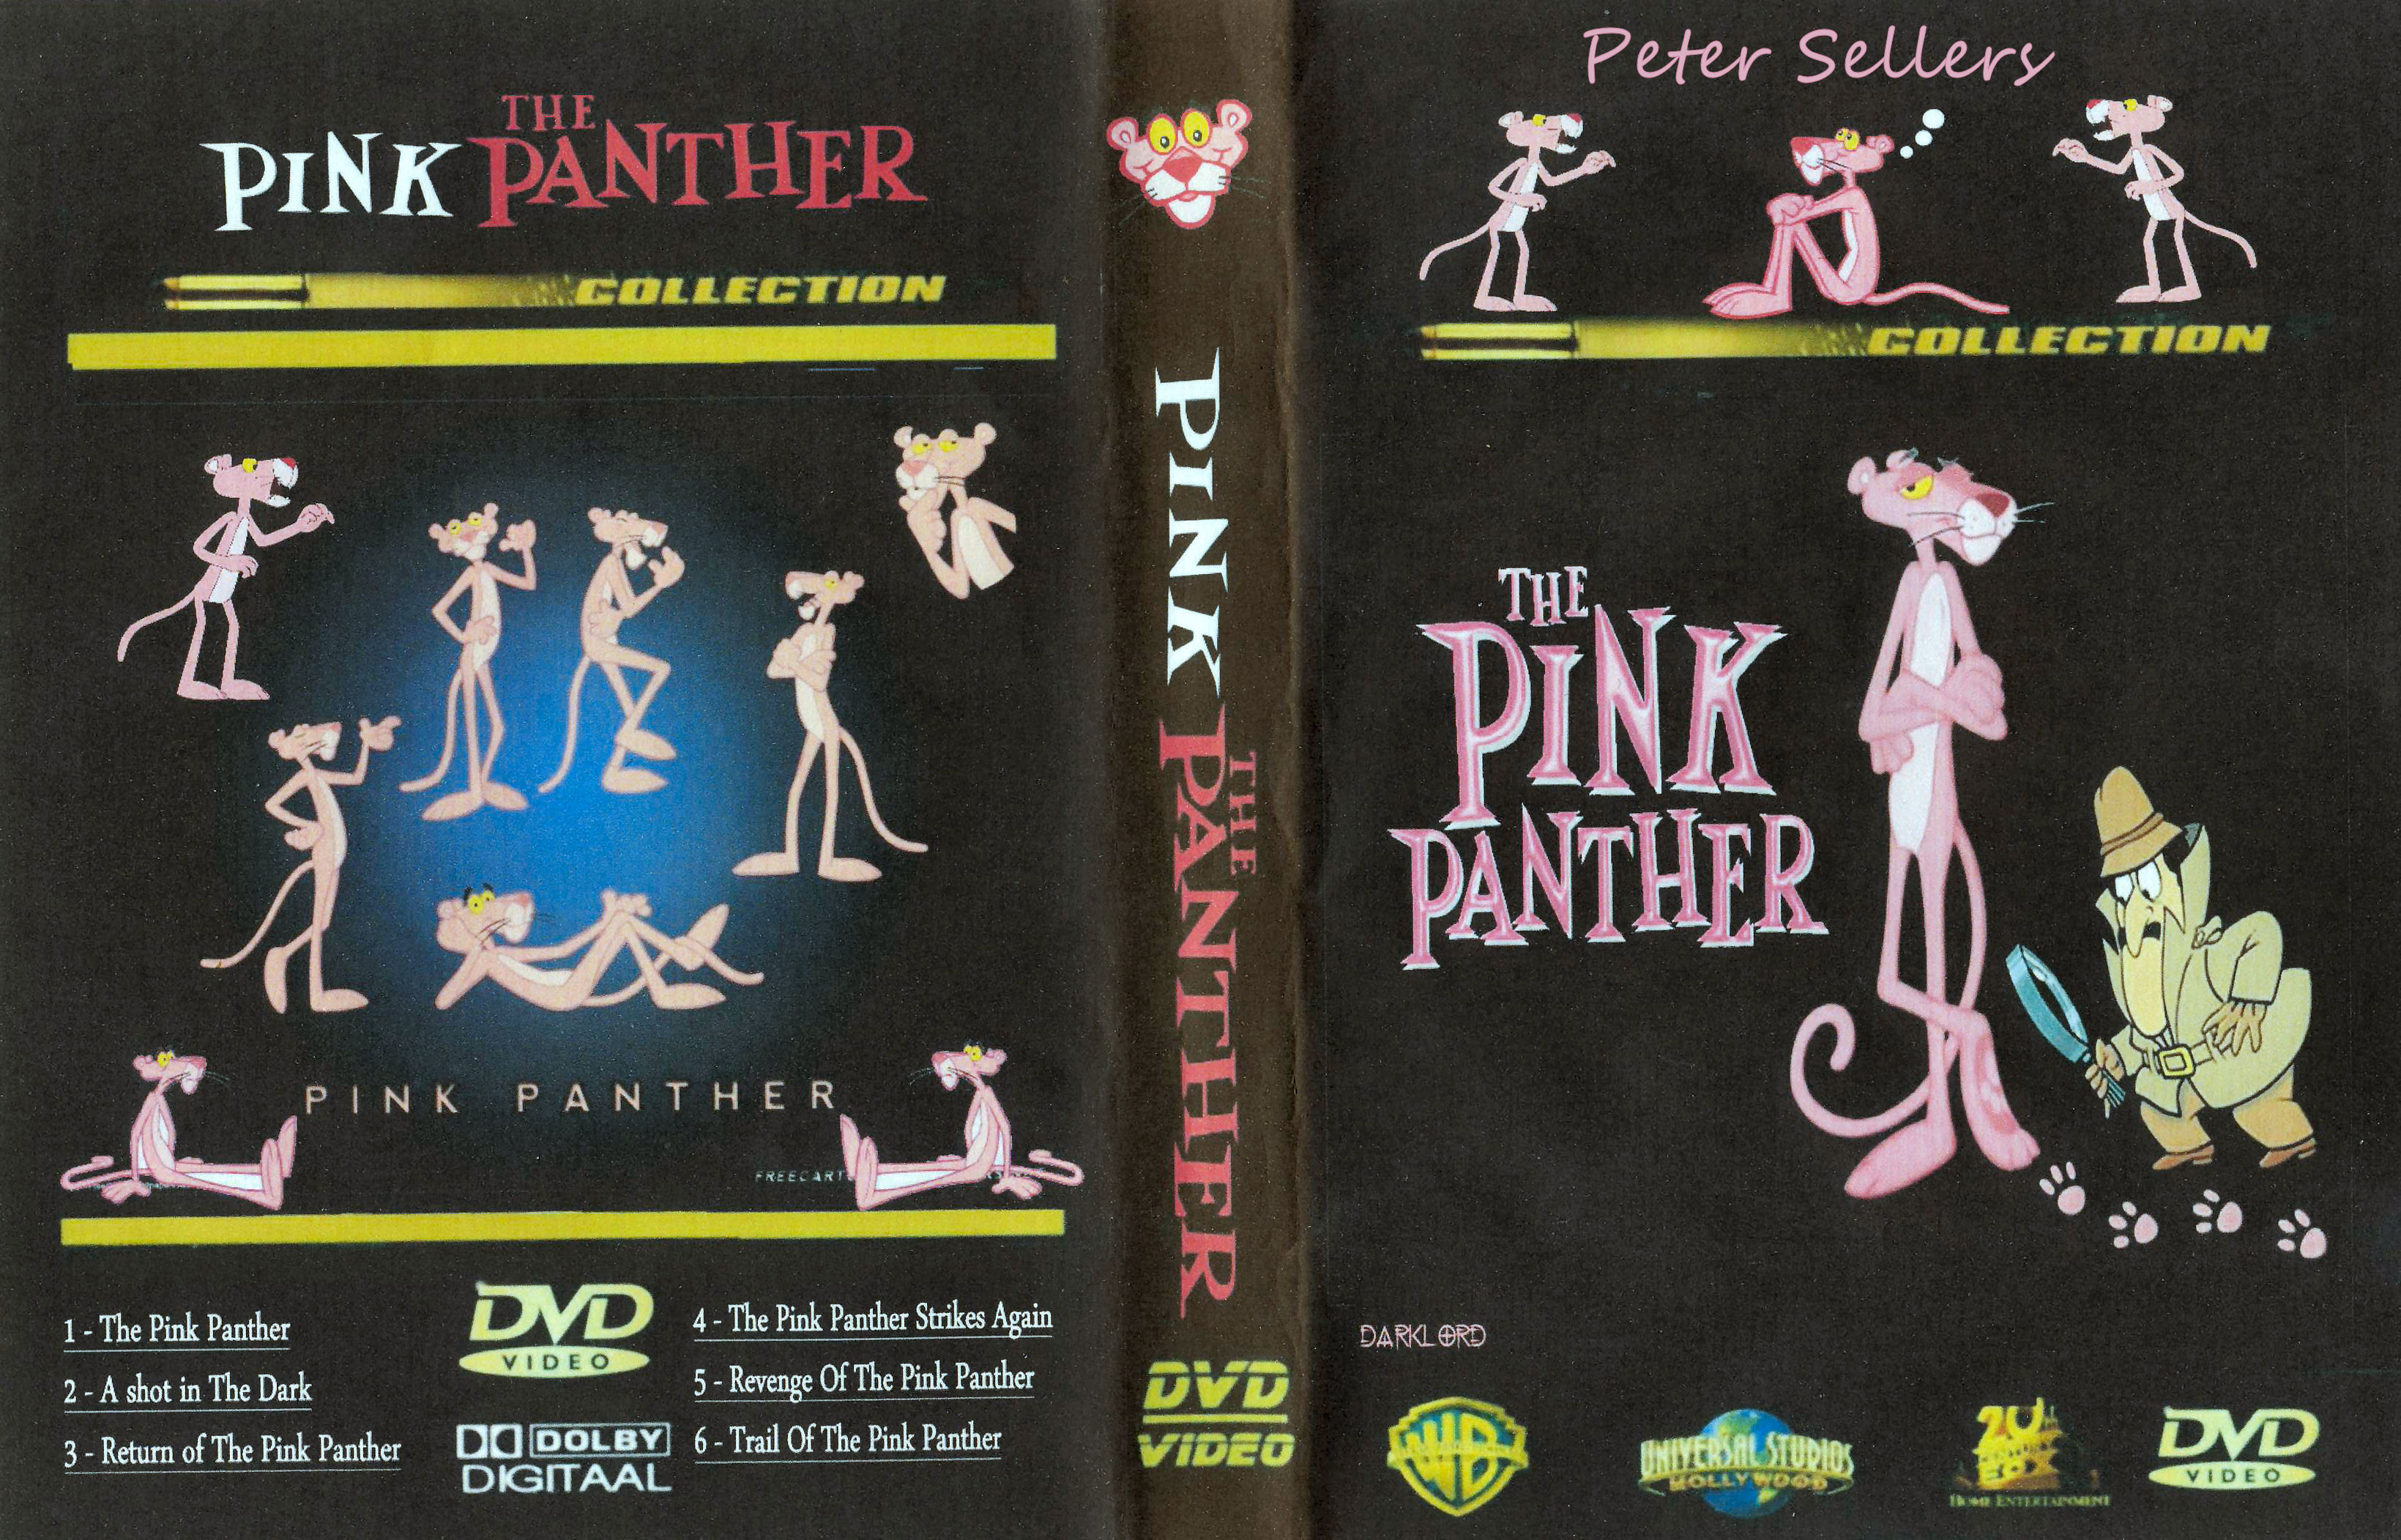 4. The Pink Panther Strikes Again (1976)